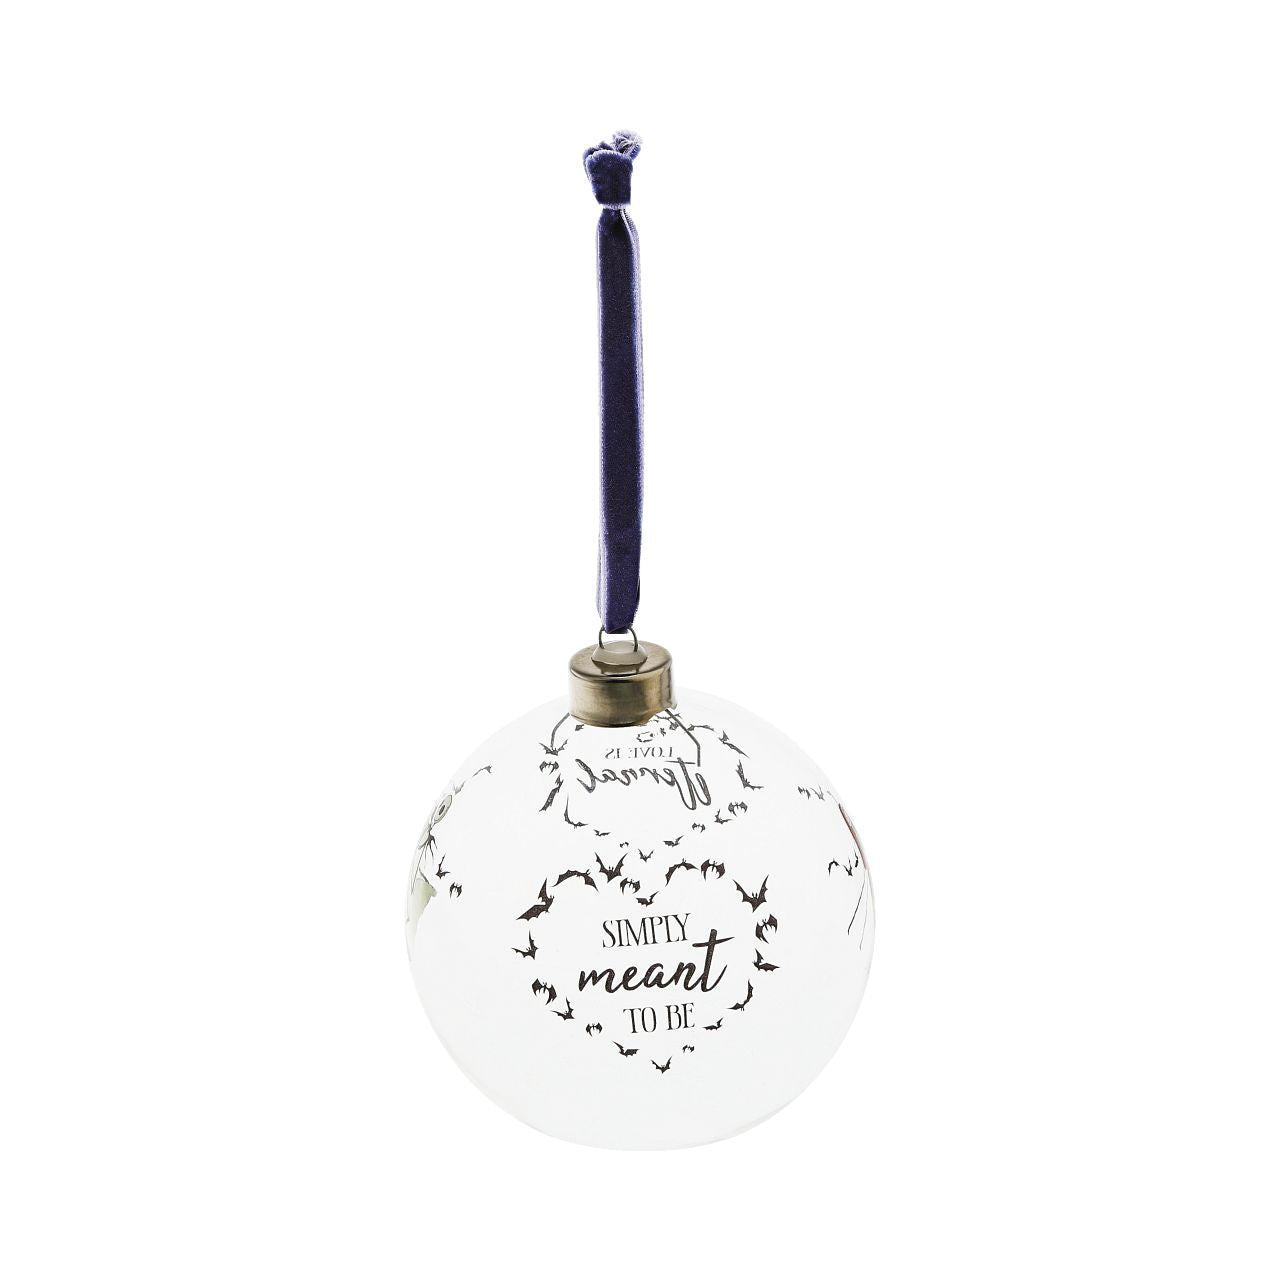 Disney Christmas Bauble Nightmare Before Christmas Bauble  This glass Nightmare Before Christmas bauble is the perfect gift to remind the happy couple that their eternal love is simply meant to be. The bauble is strung with black ribbon and is presented in a Disney branded gift box.